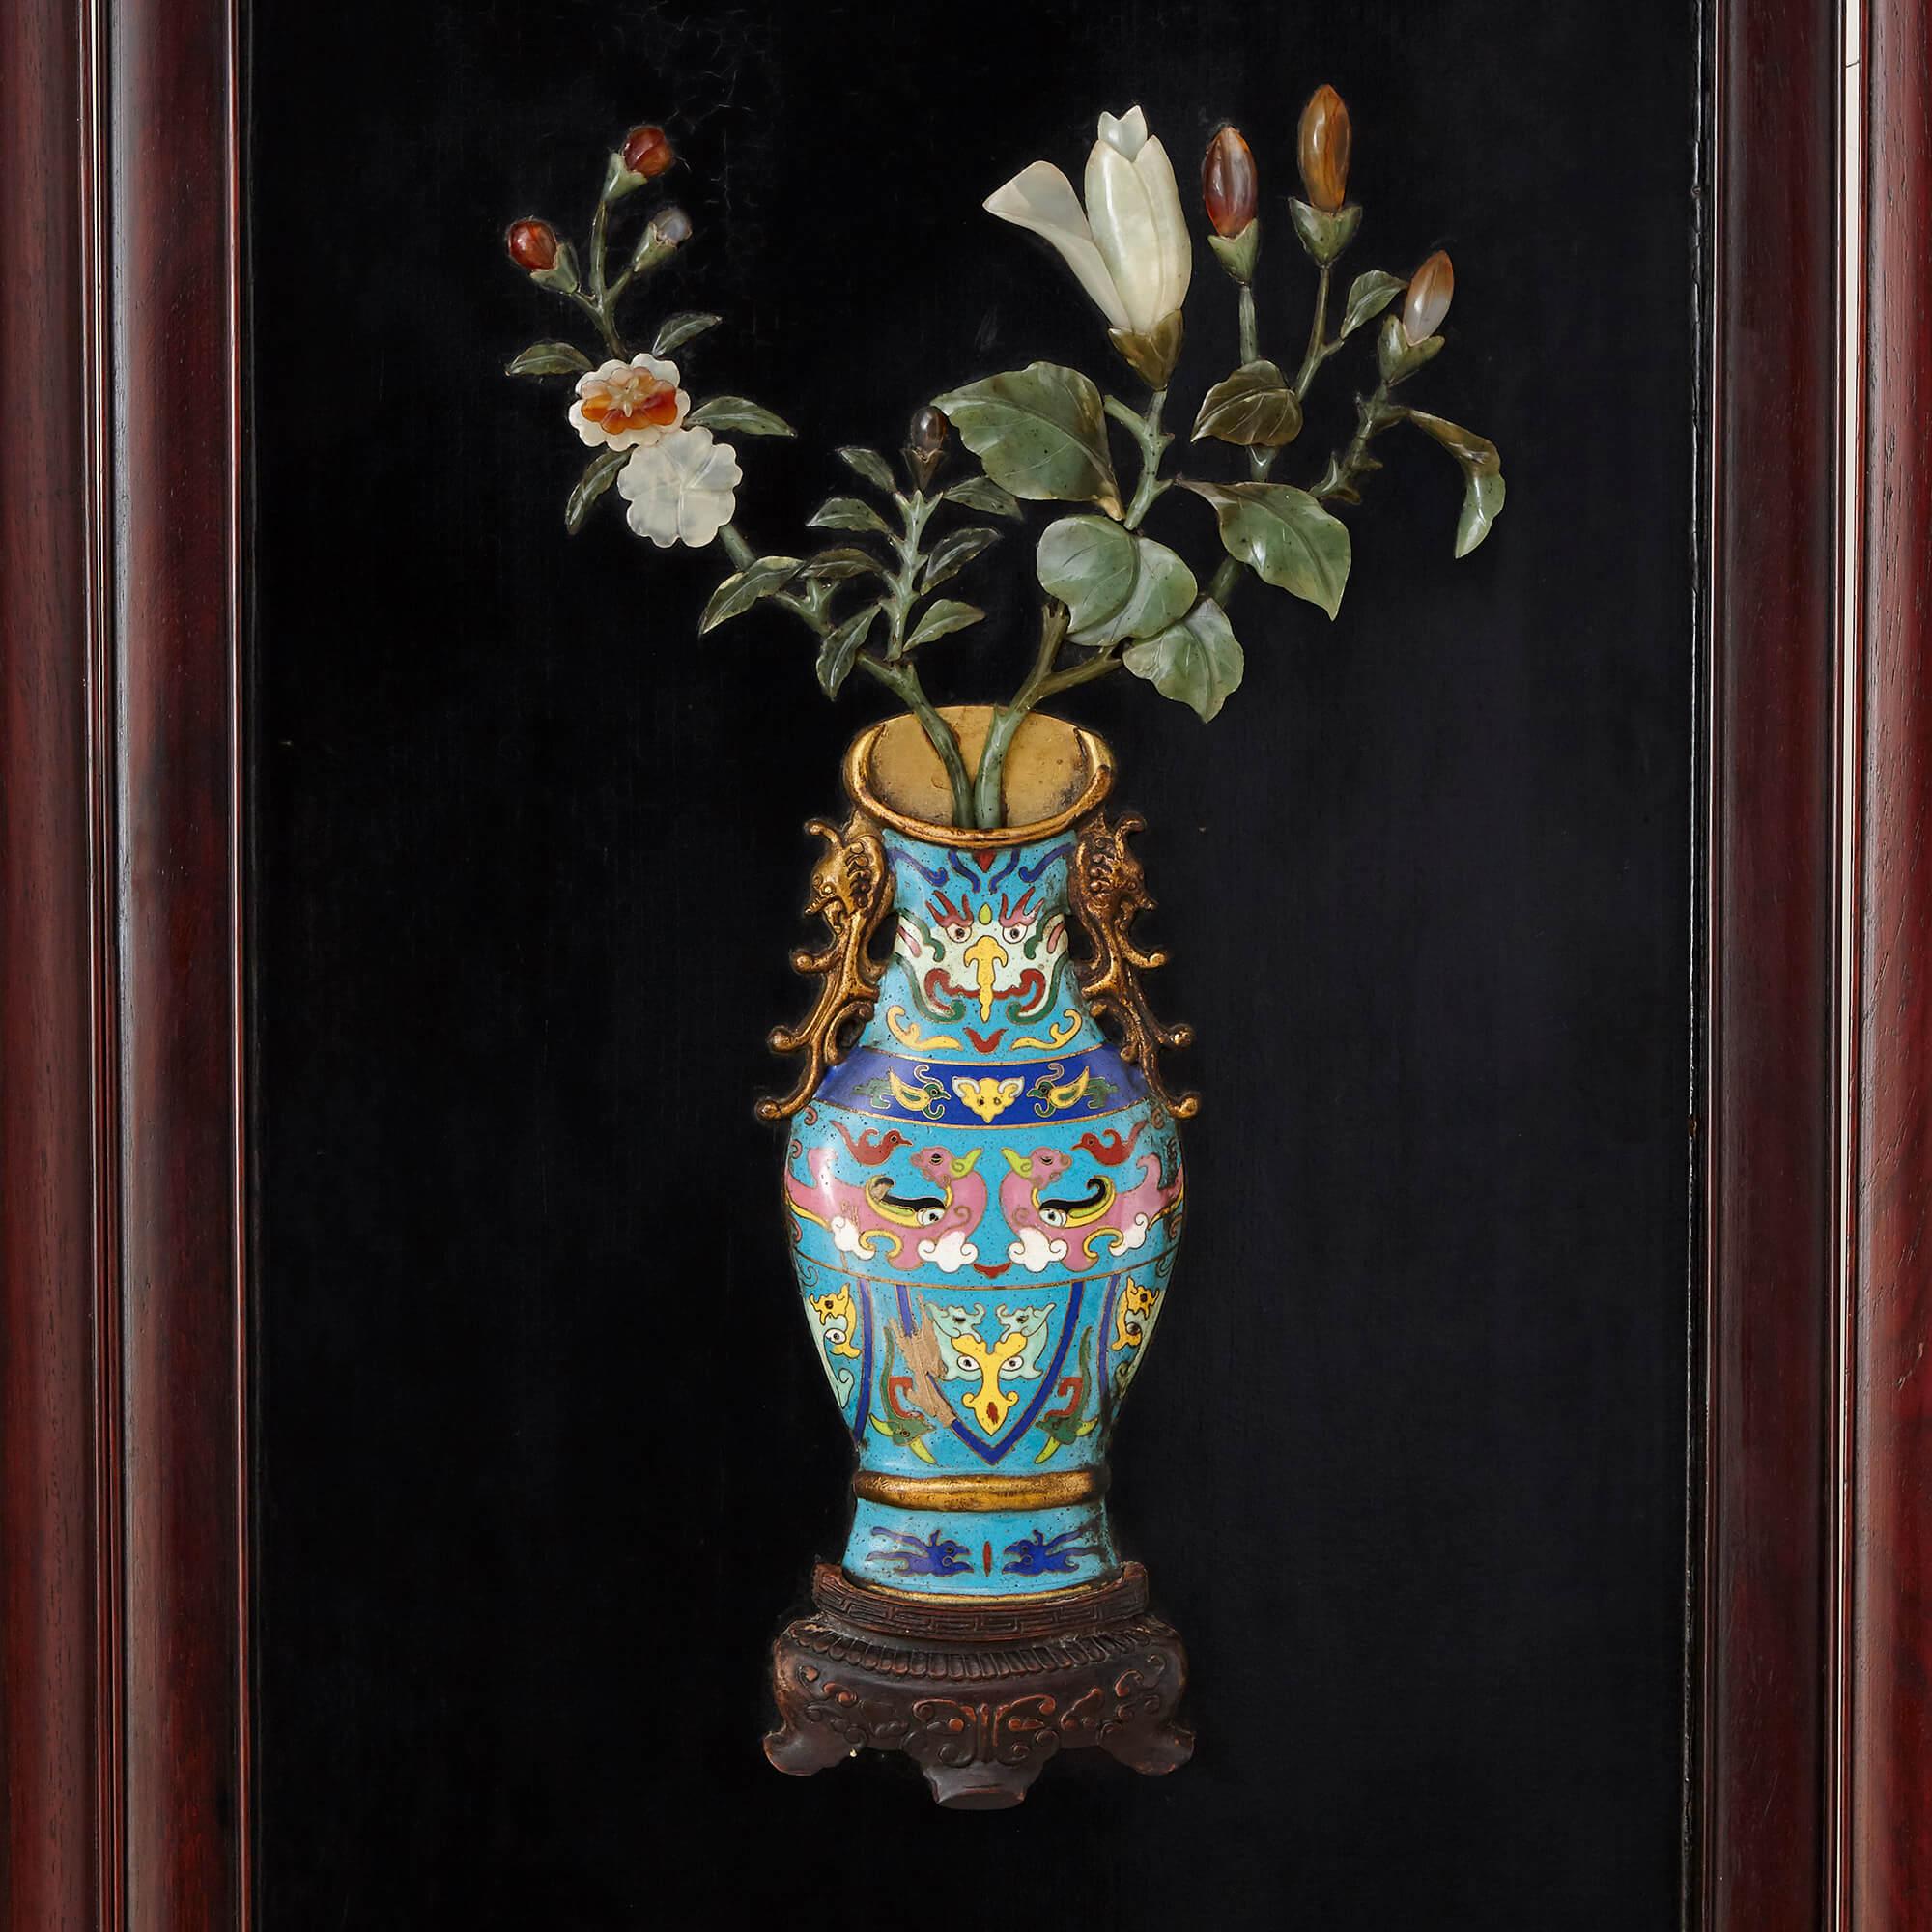 Stone Chinese Hardstone, Cloisonne Enamel and Lacquer Screen